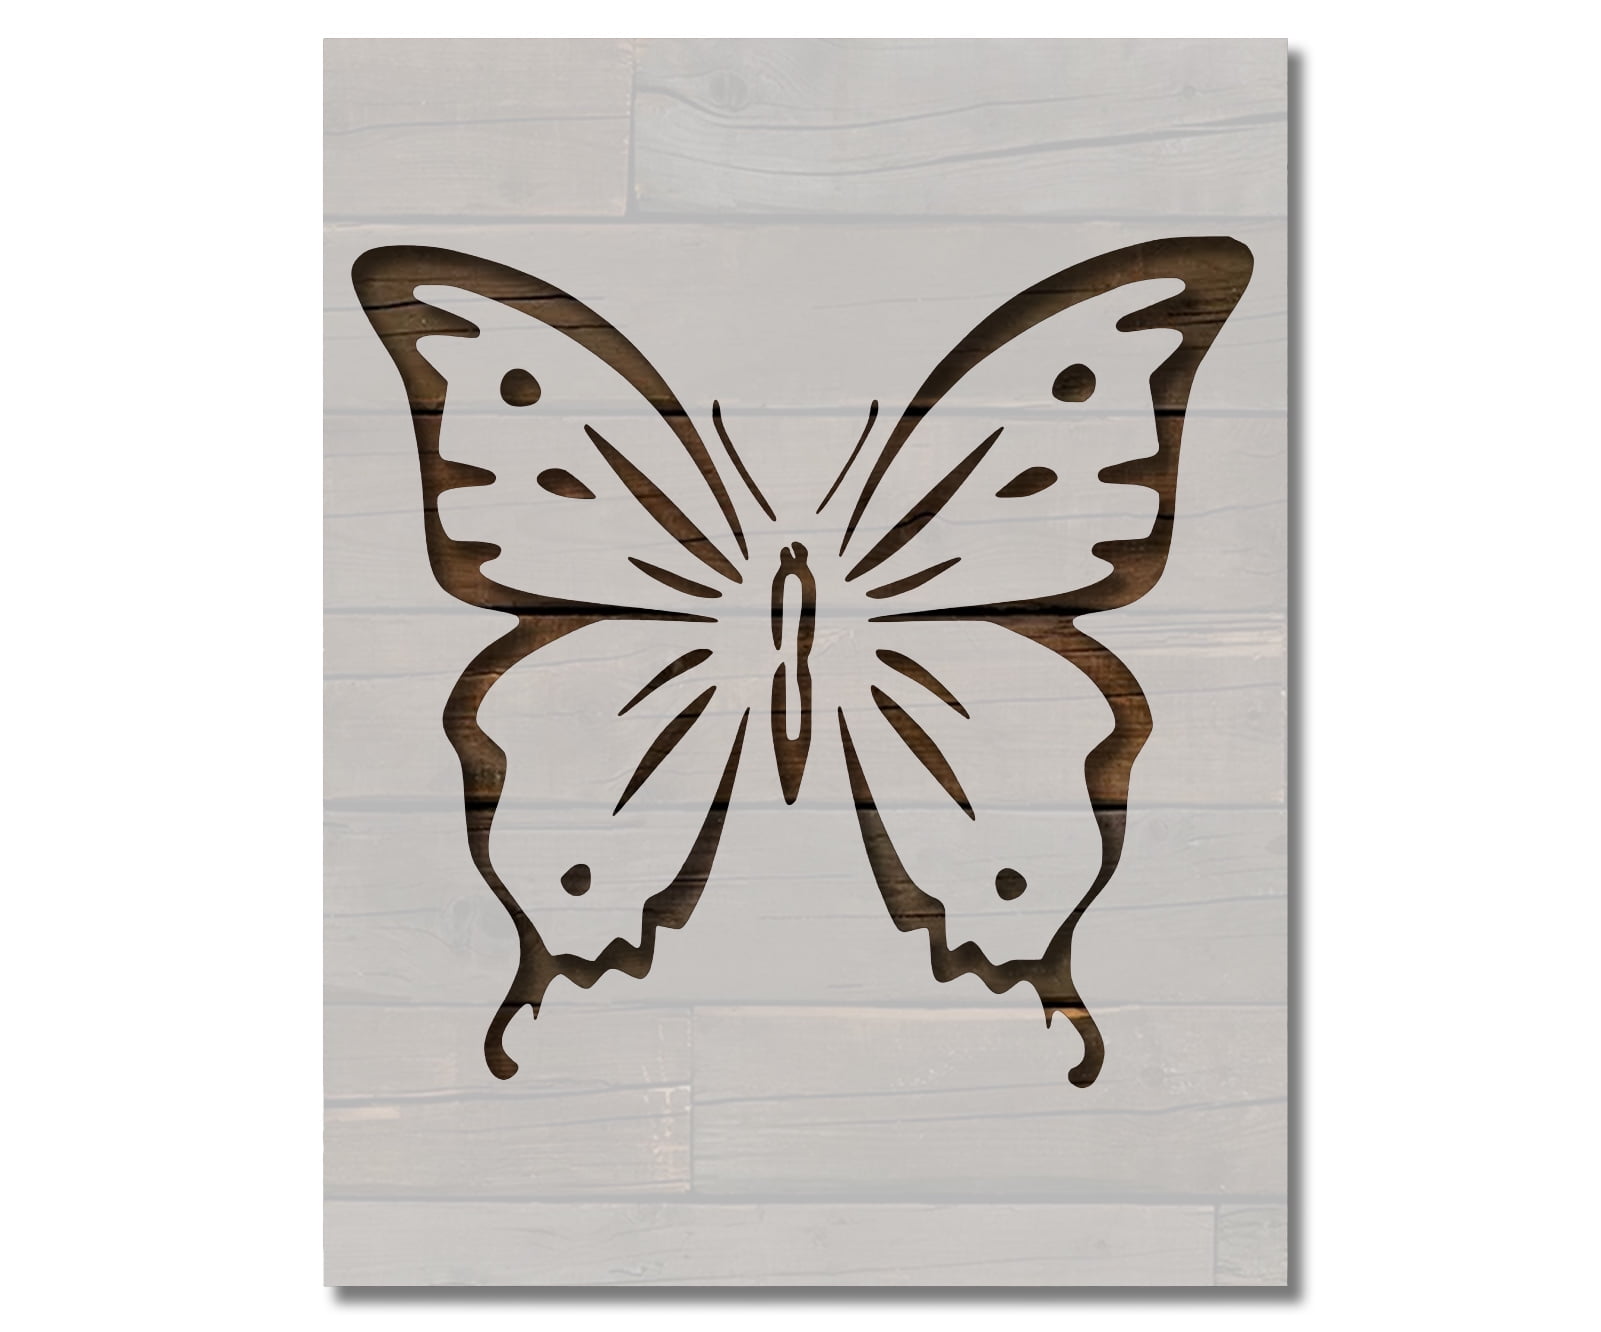 BUTTERFLY DECAL VINYL PAINTING STENCIL PACK *HIGH QUALITY* – ONE15